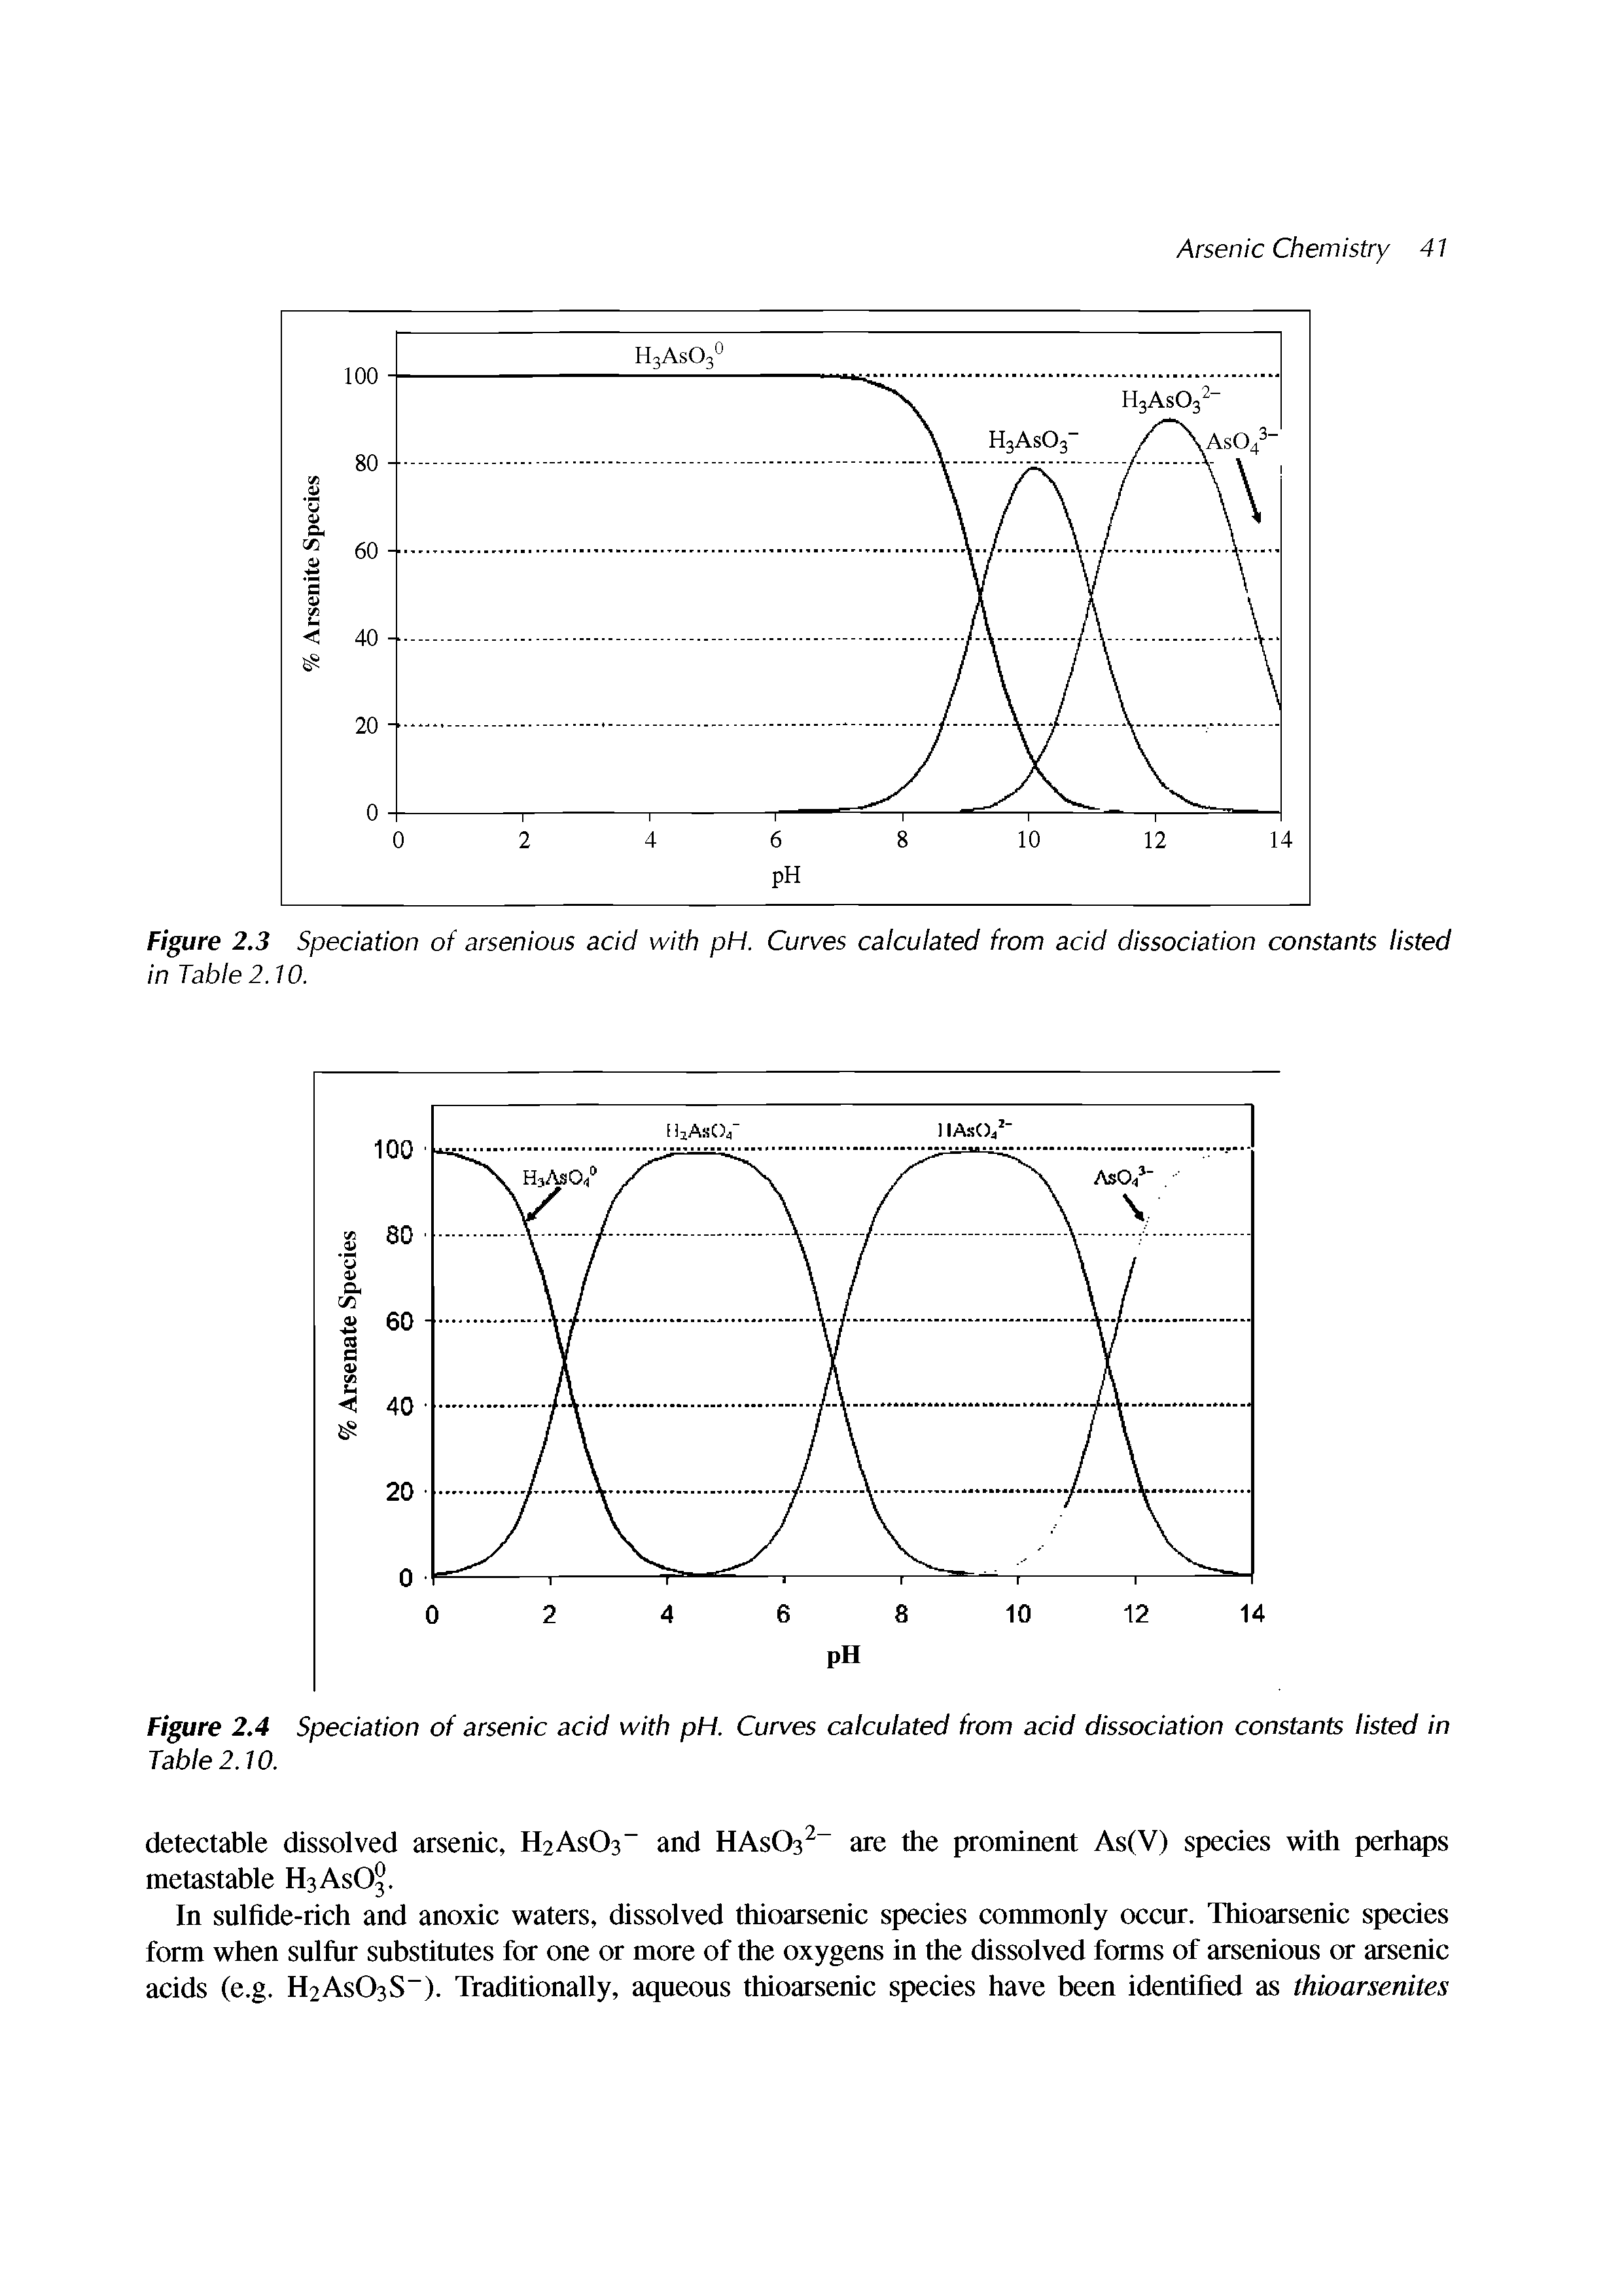 Figure 2.3 Speciation of arsenious acid with pH. Curves calculated from acid dissociation constants listed in Table 2.10.